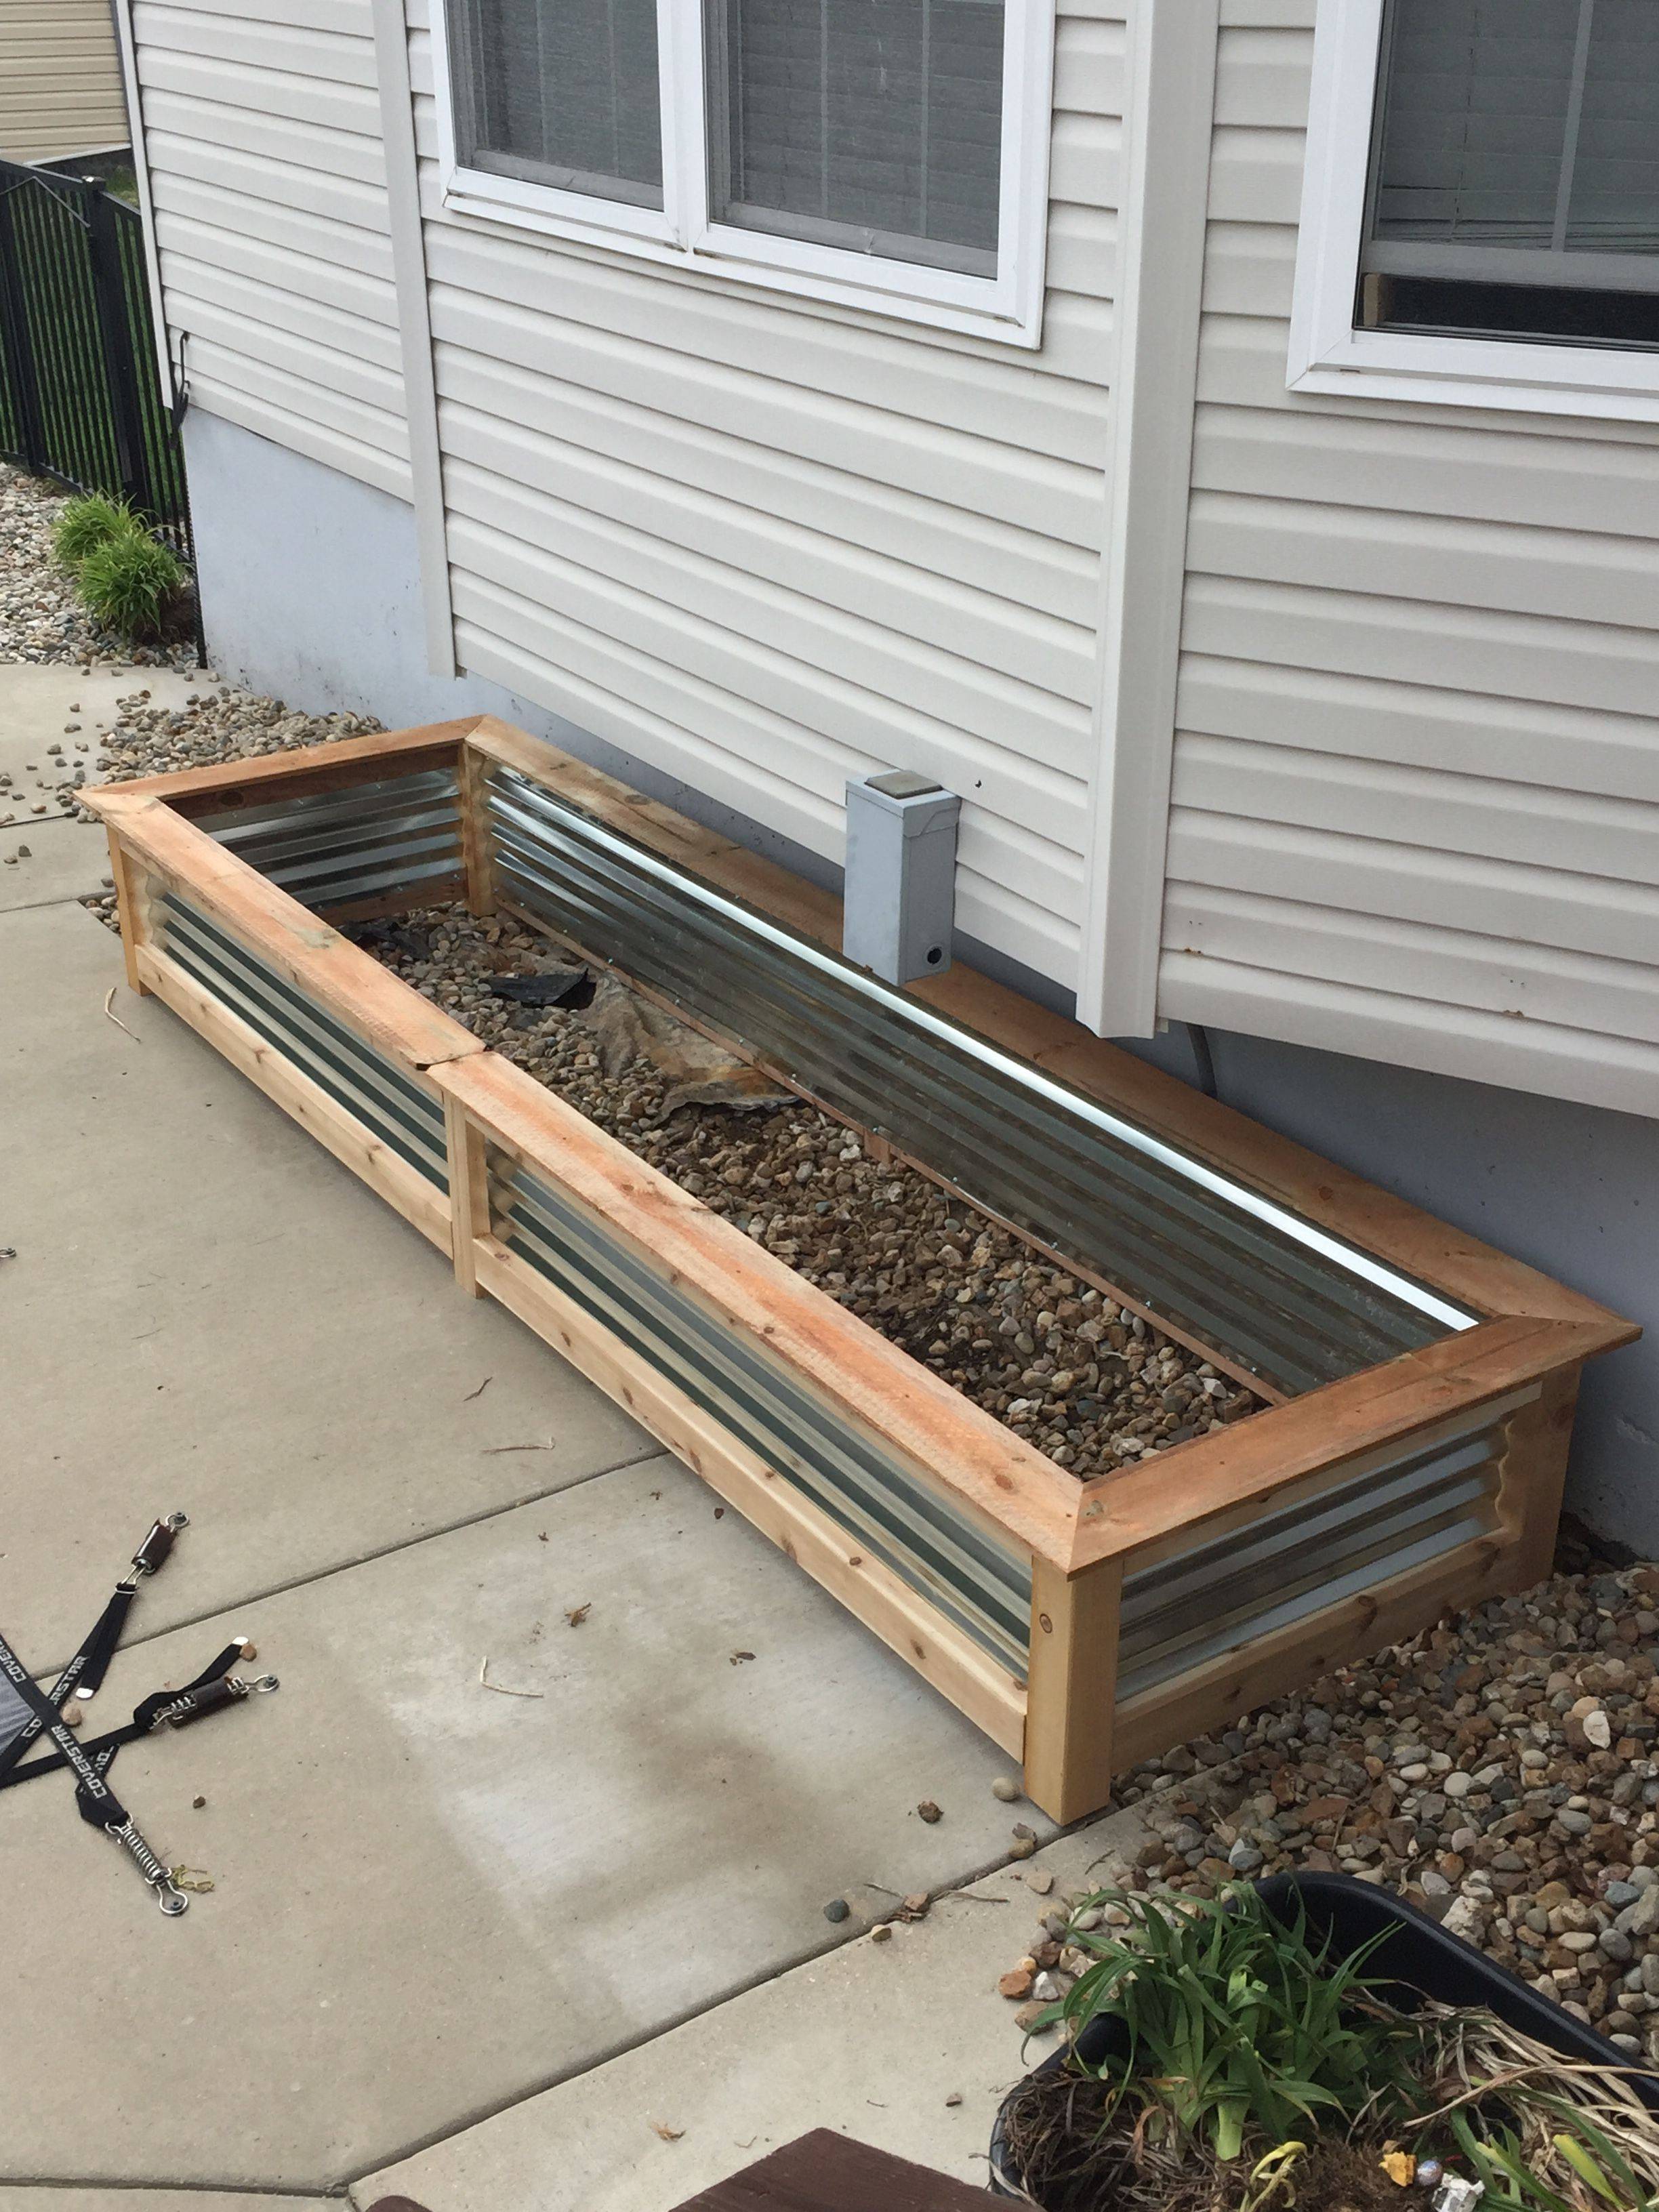 Your Own Corrugated Metal Raised Bed